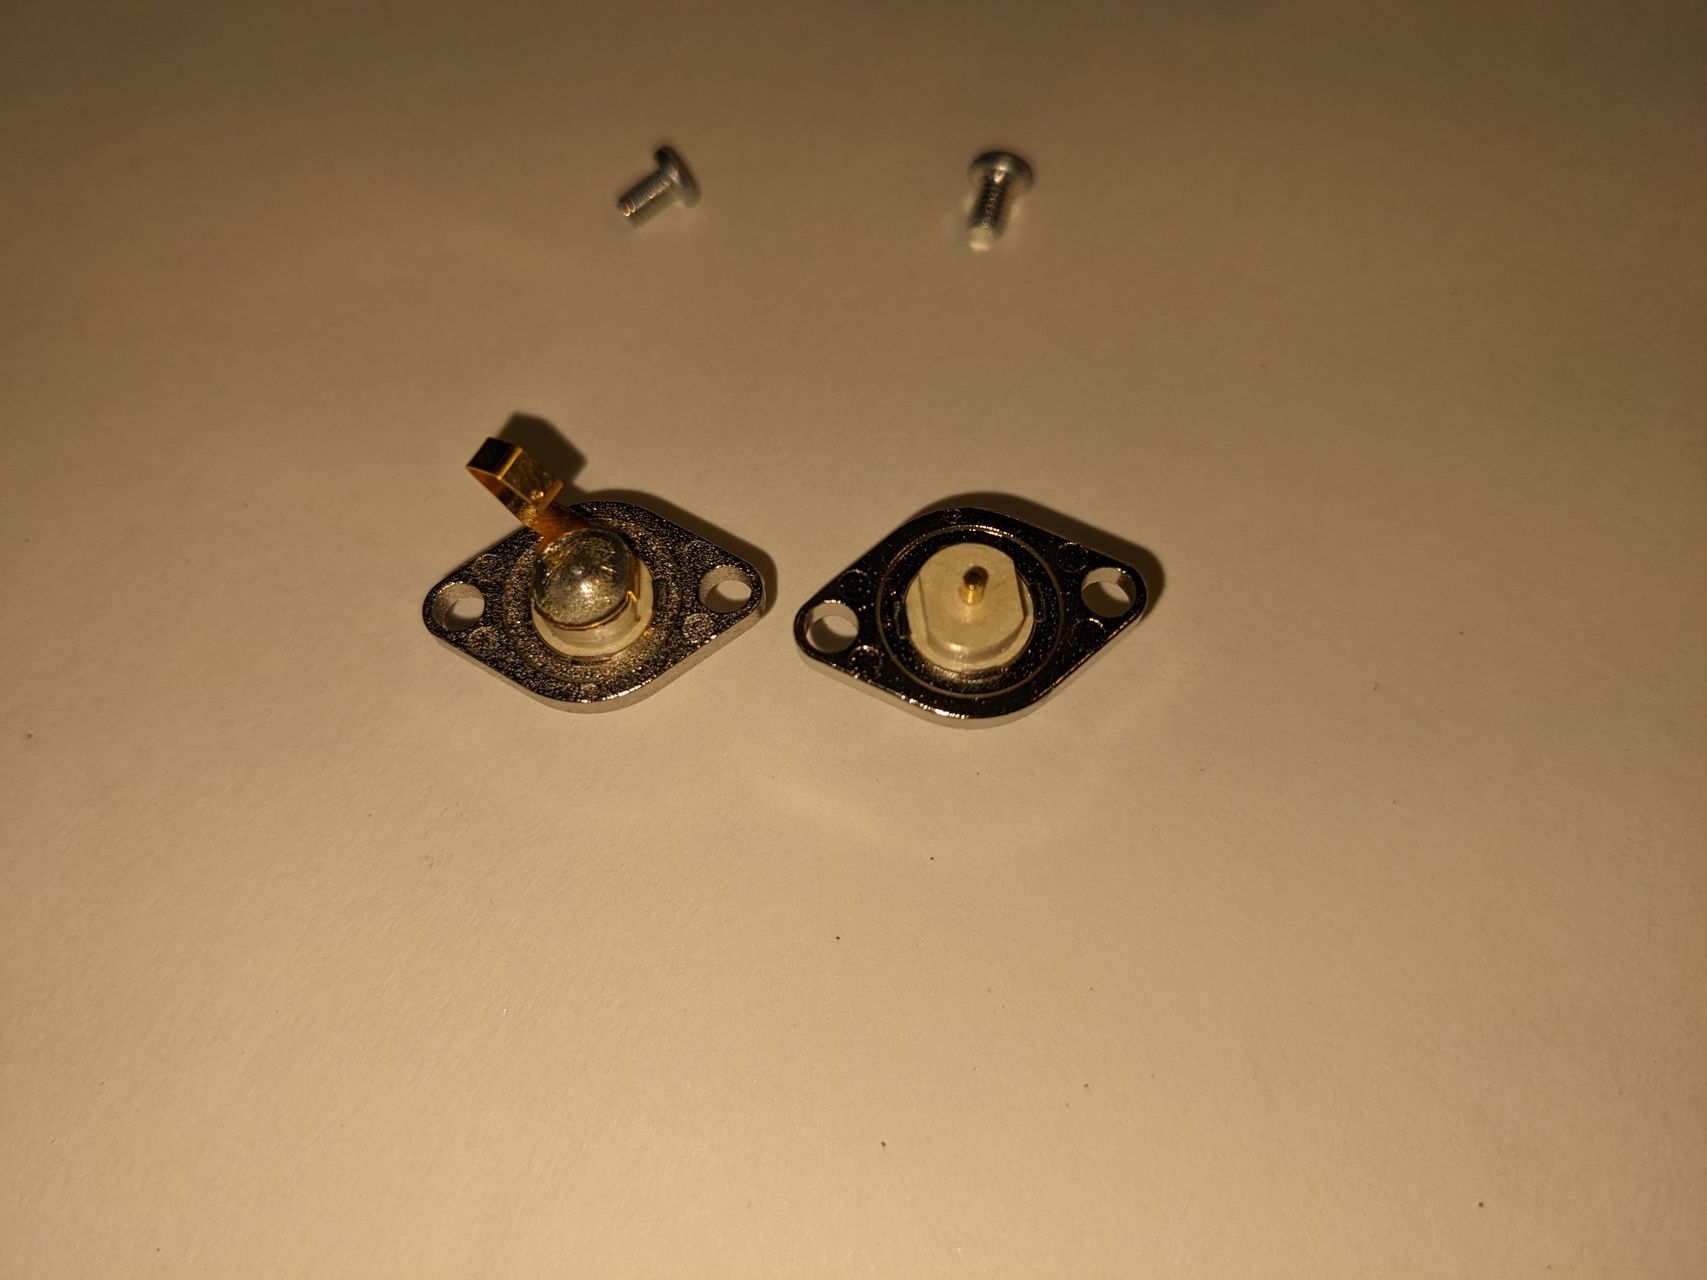 photo of connectors side by side